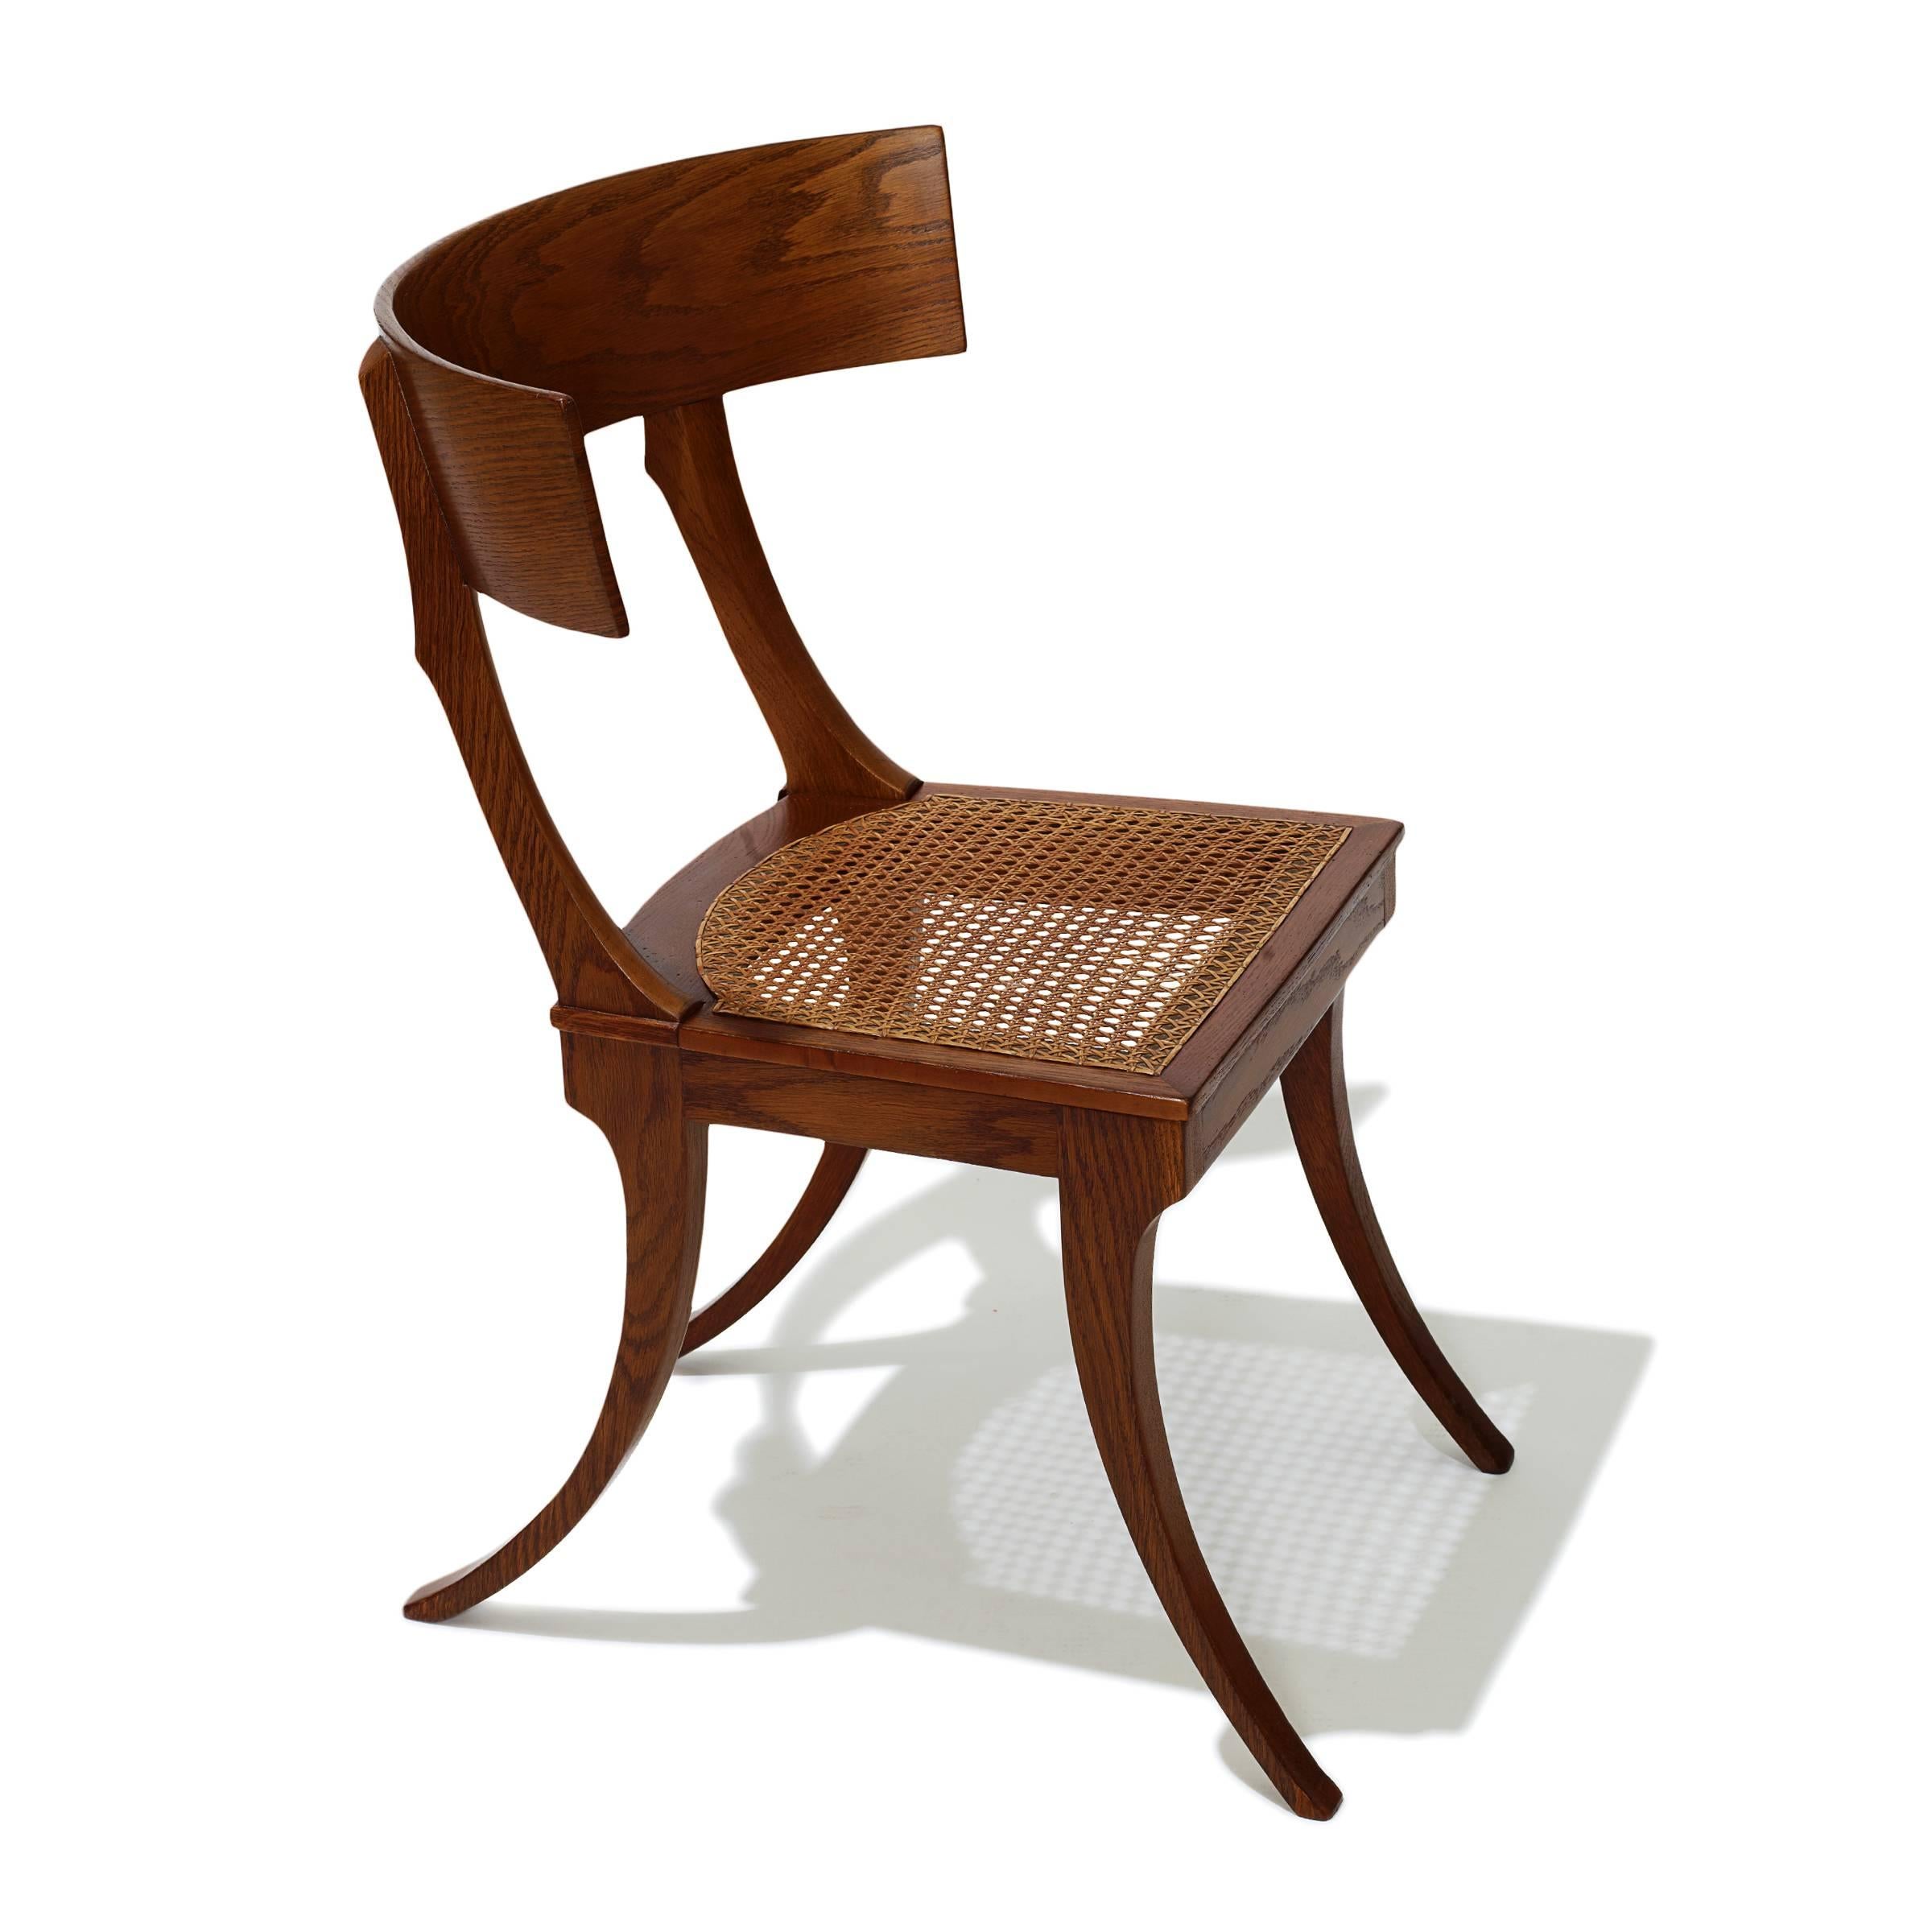 Exquisite pair of klismos chairs in oak with handwoven French-caning, Denmark, circa 1850. Identical examples of this model are in the collection of the Designmuseum Danmark in Copenhagen.

(cf: Mirjam Gelfer-Jørgensen, Danish Neo-Antique Furniture,